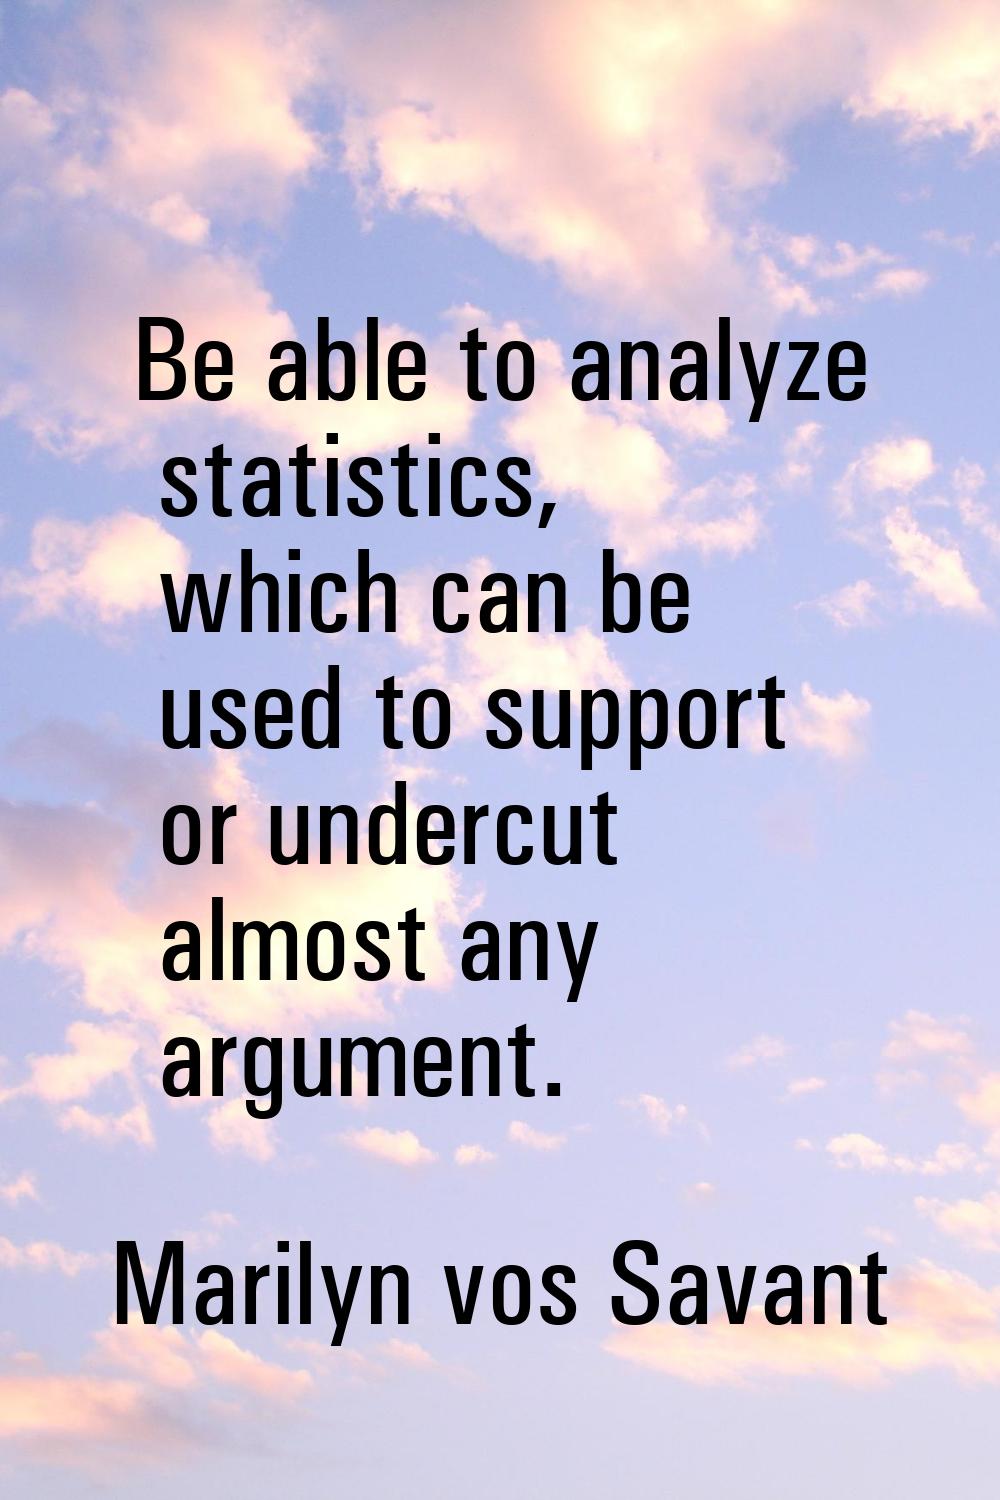 Be able to analyze statistics, which can be used to support or undercut almost any argument.